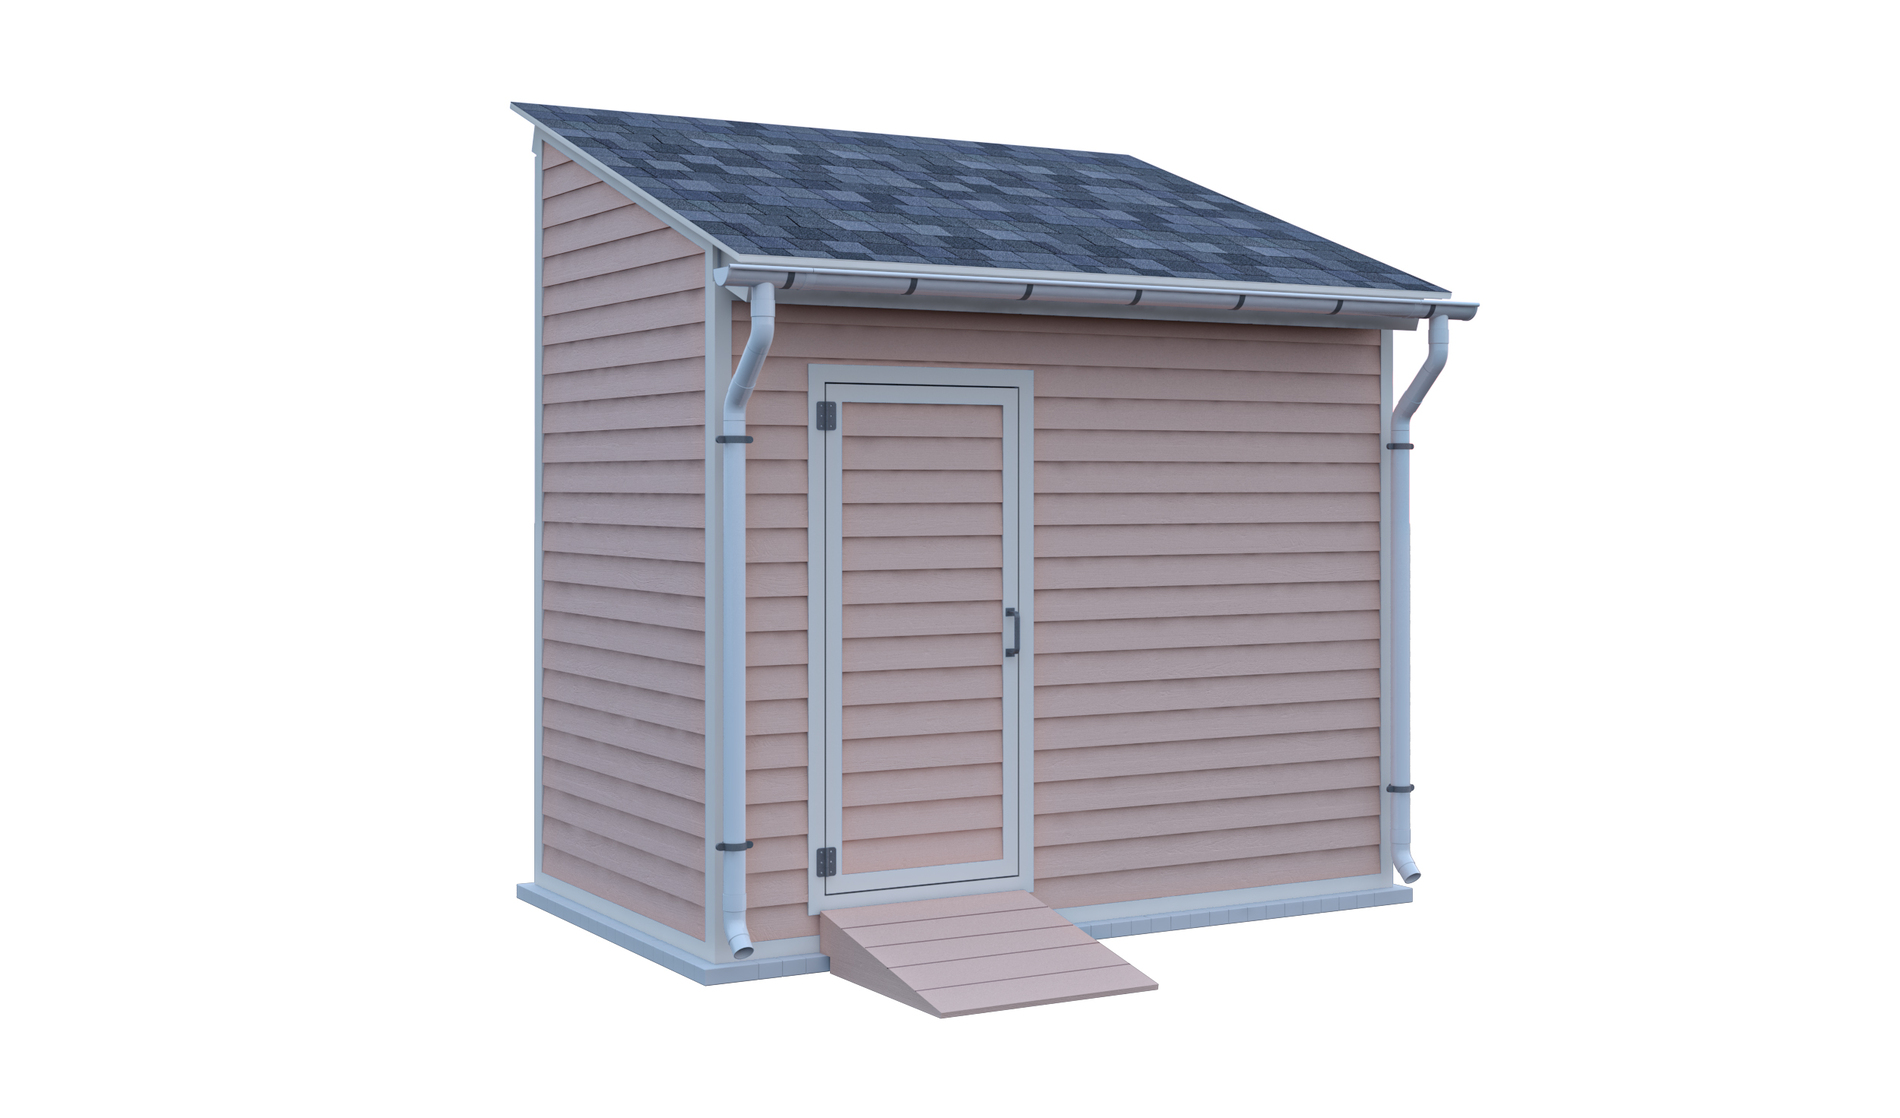 6x10 lean to storage shed